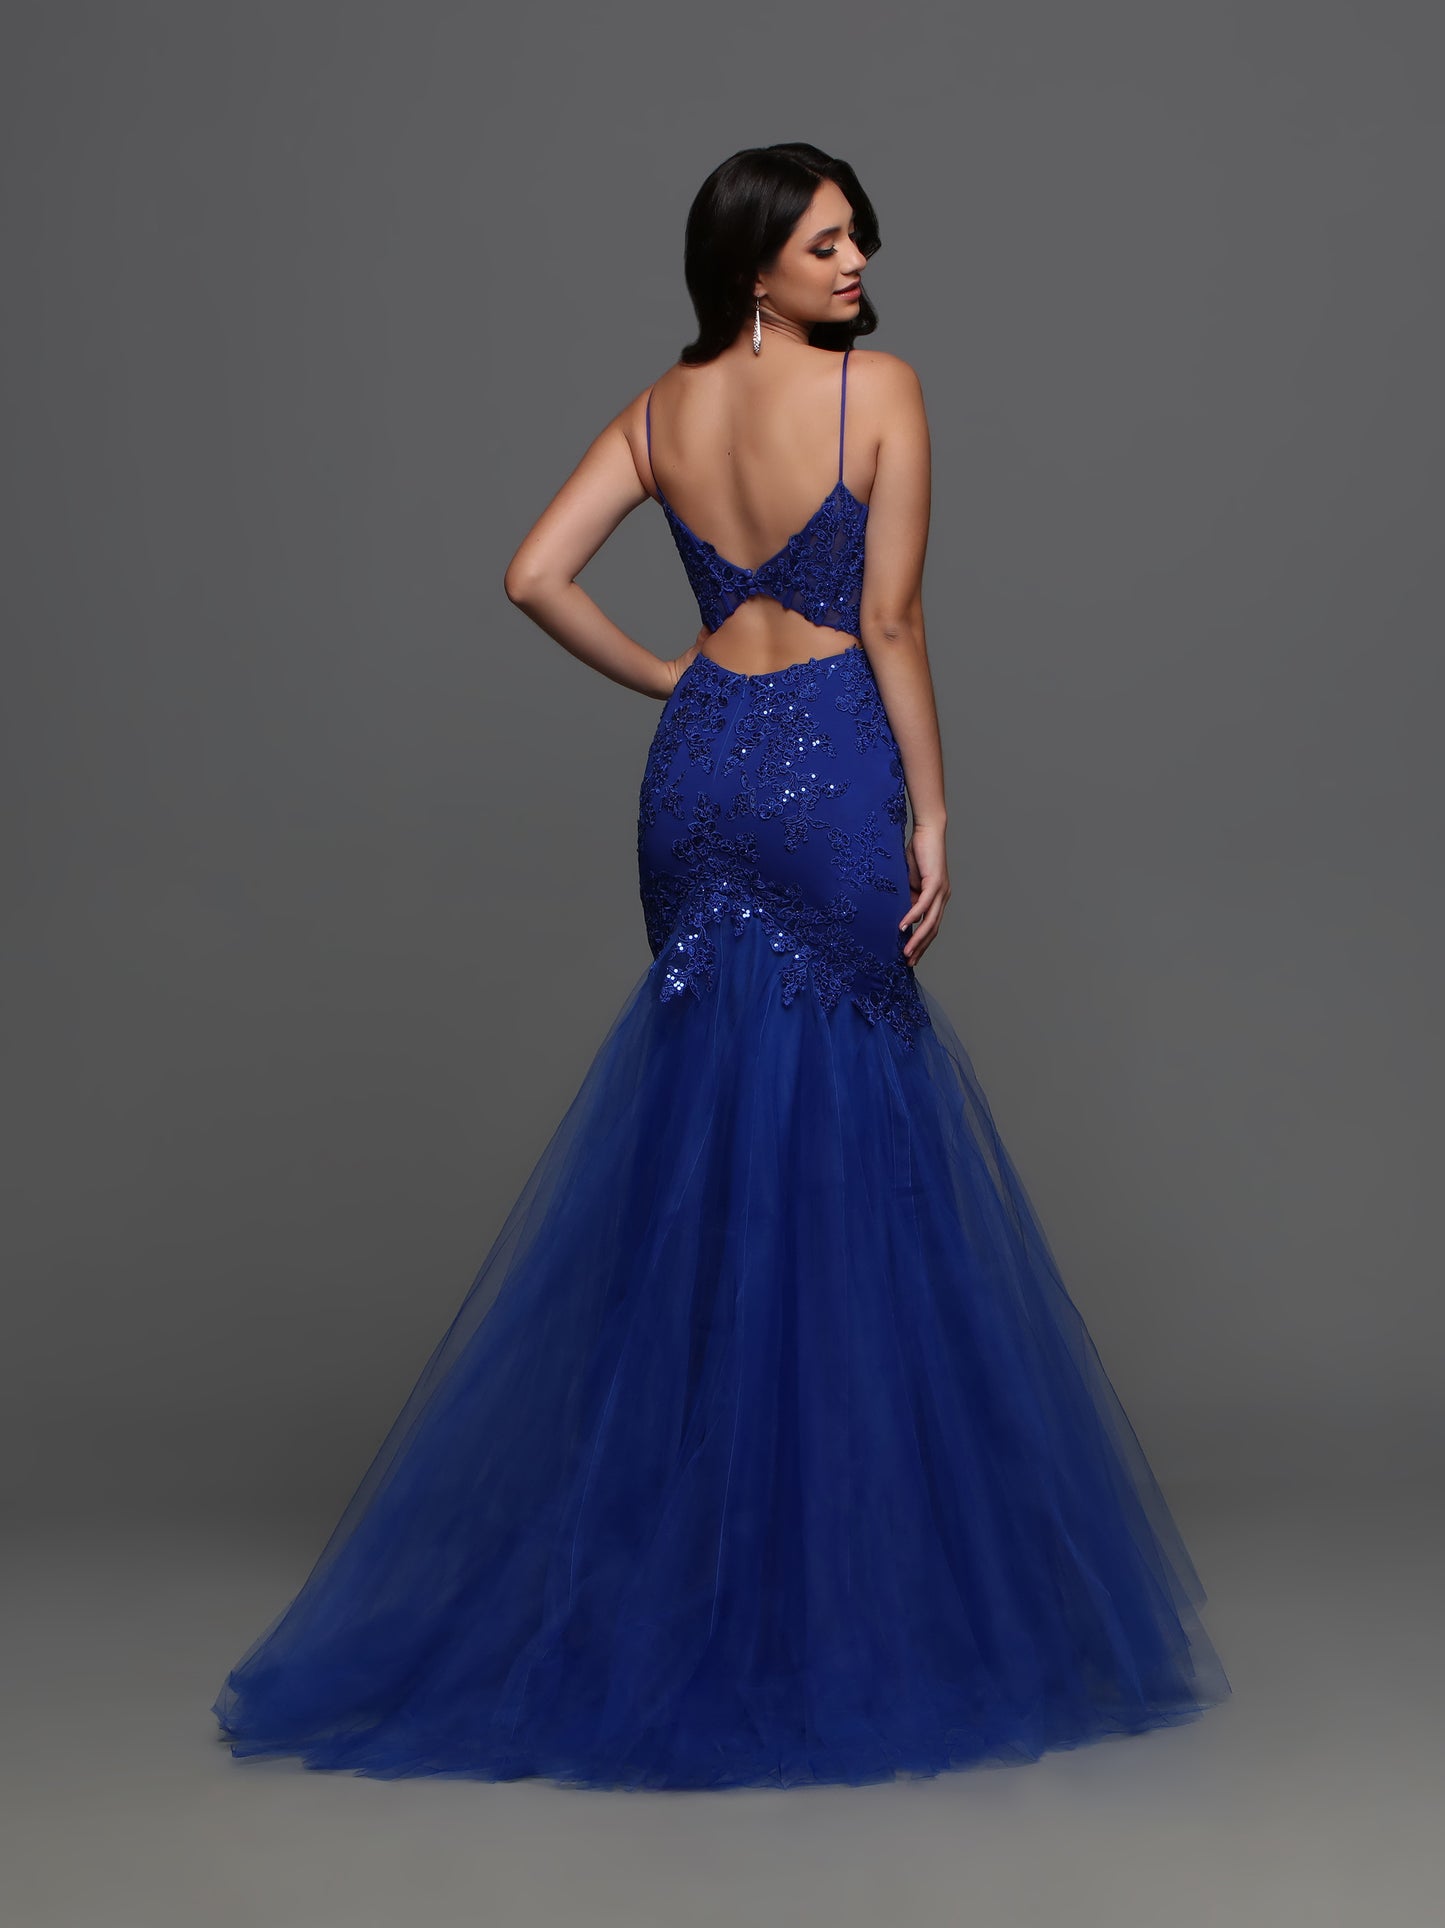 Expertly crafted by renowned designer Candice Wang, the 72321 Fitted Lace Mermaid Prom Dress is a stunning evening gown that showcases a sheer corset V neck and a cut out back. Perfect for prom or any formal event, this dress exudes elegance and sophistication.  Sizes: 0-20  Colors: Black, Red, Cobalt